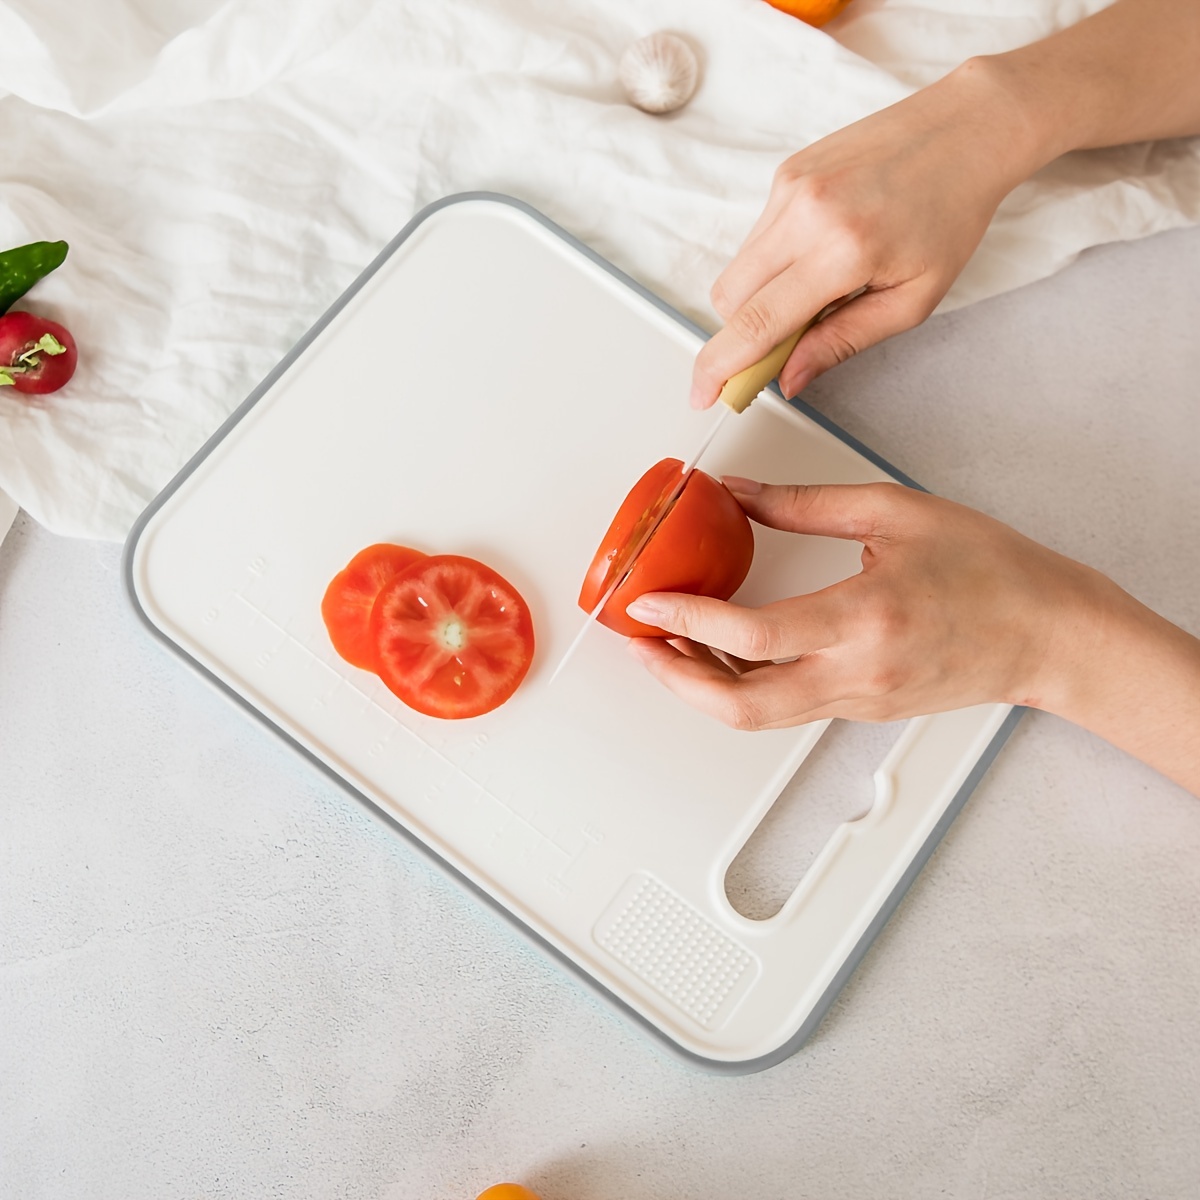 Large Kitchen Plastic Cutting Board - Dishwasher Safe Non-Slip Cutting  Boards with Juice Grooves, Easy Grip Handles - Large and Thick Chopping  Board